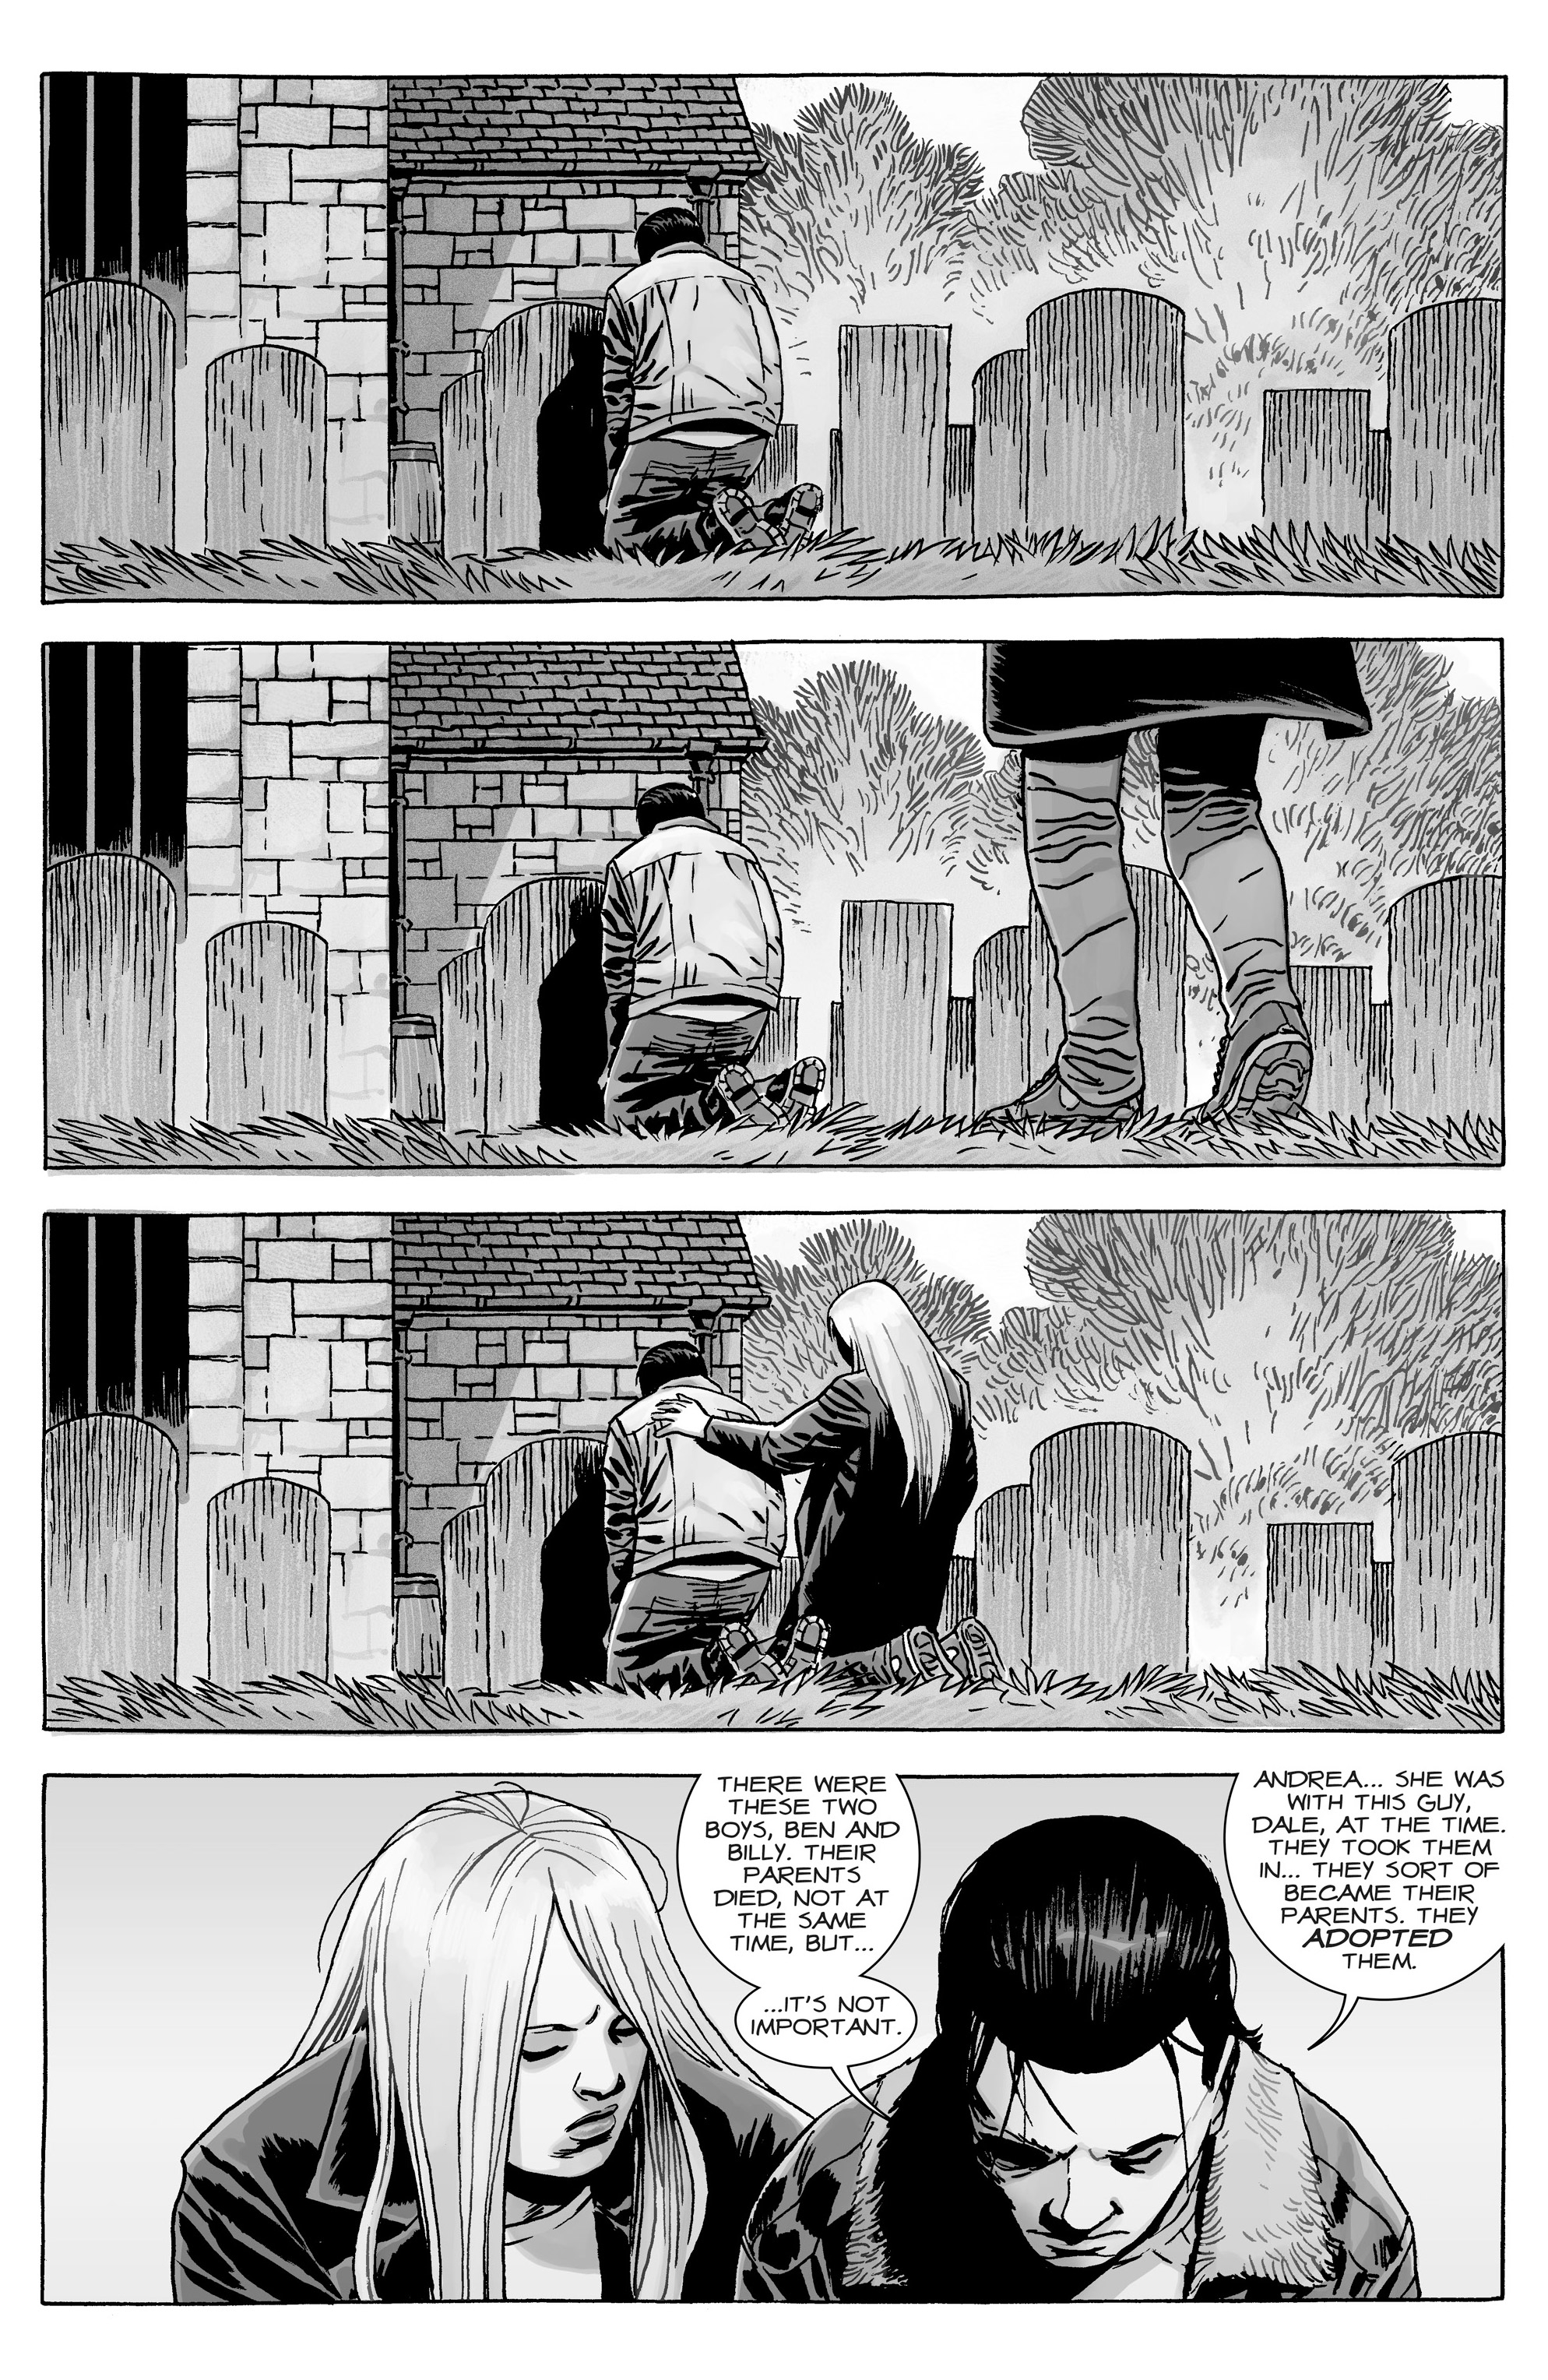 The Walking Dead (2003-): Chapter 169 - Page 3